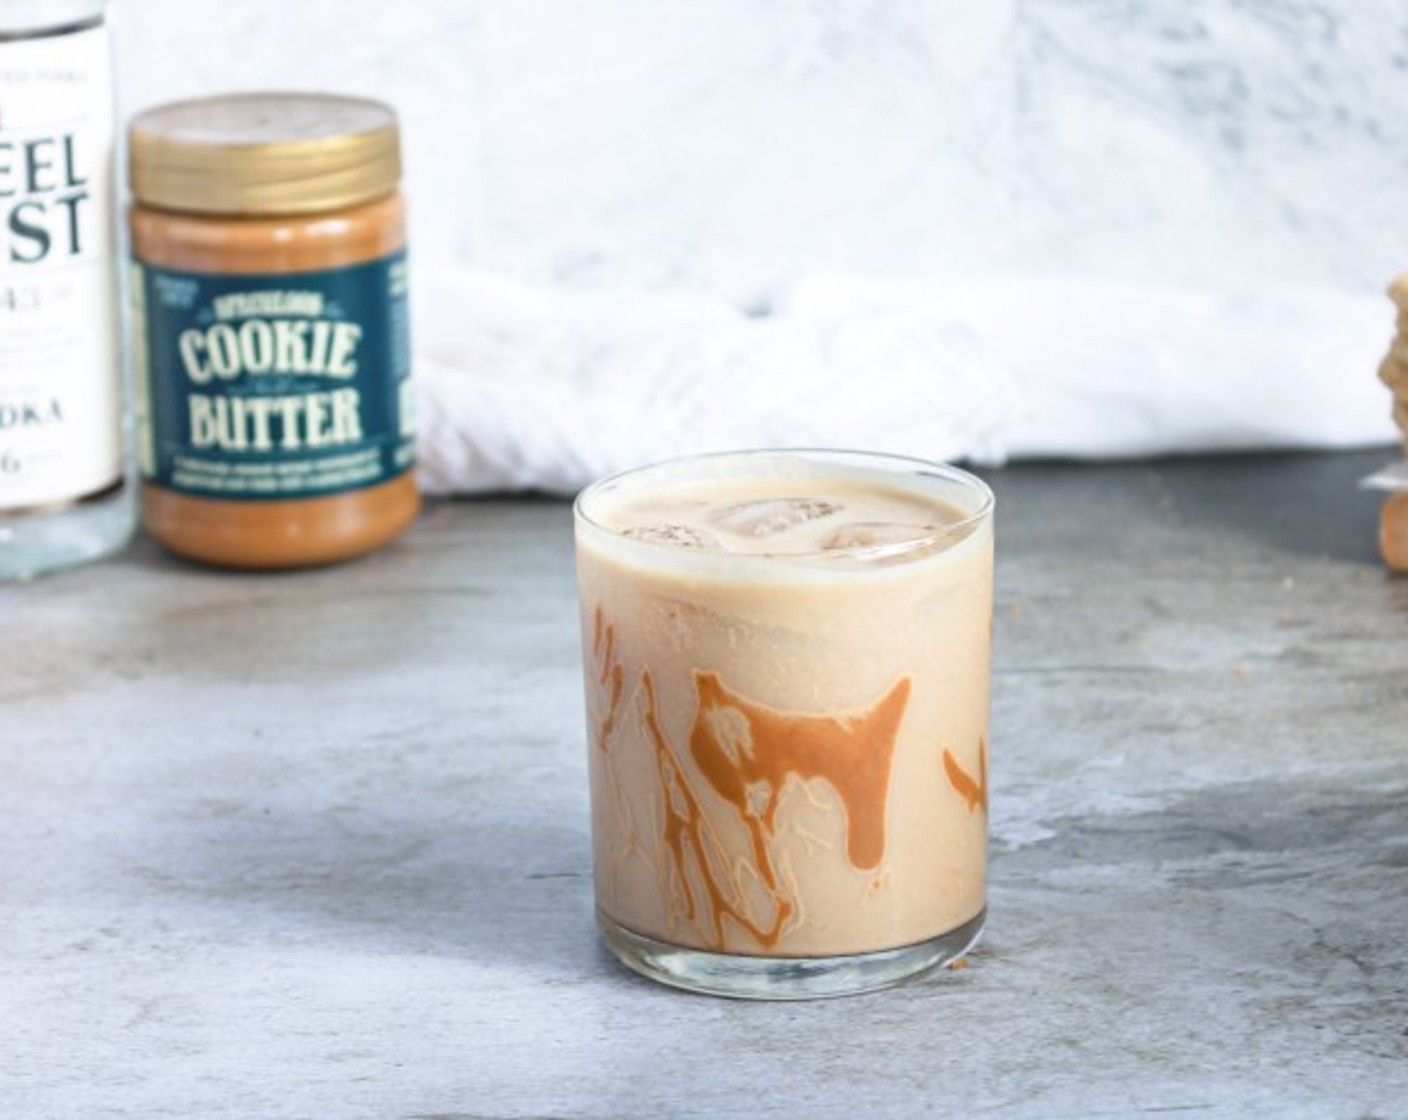 Creamy Cookie Butter Cocktail